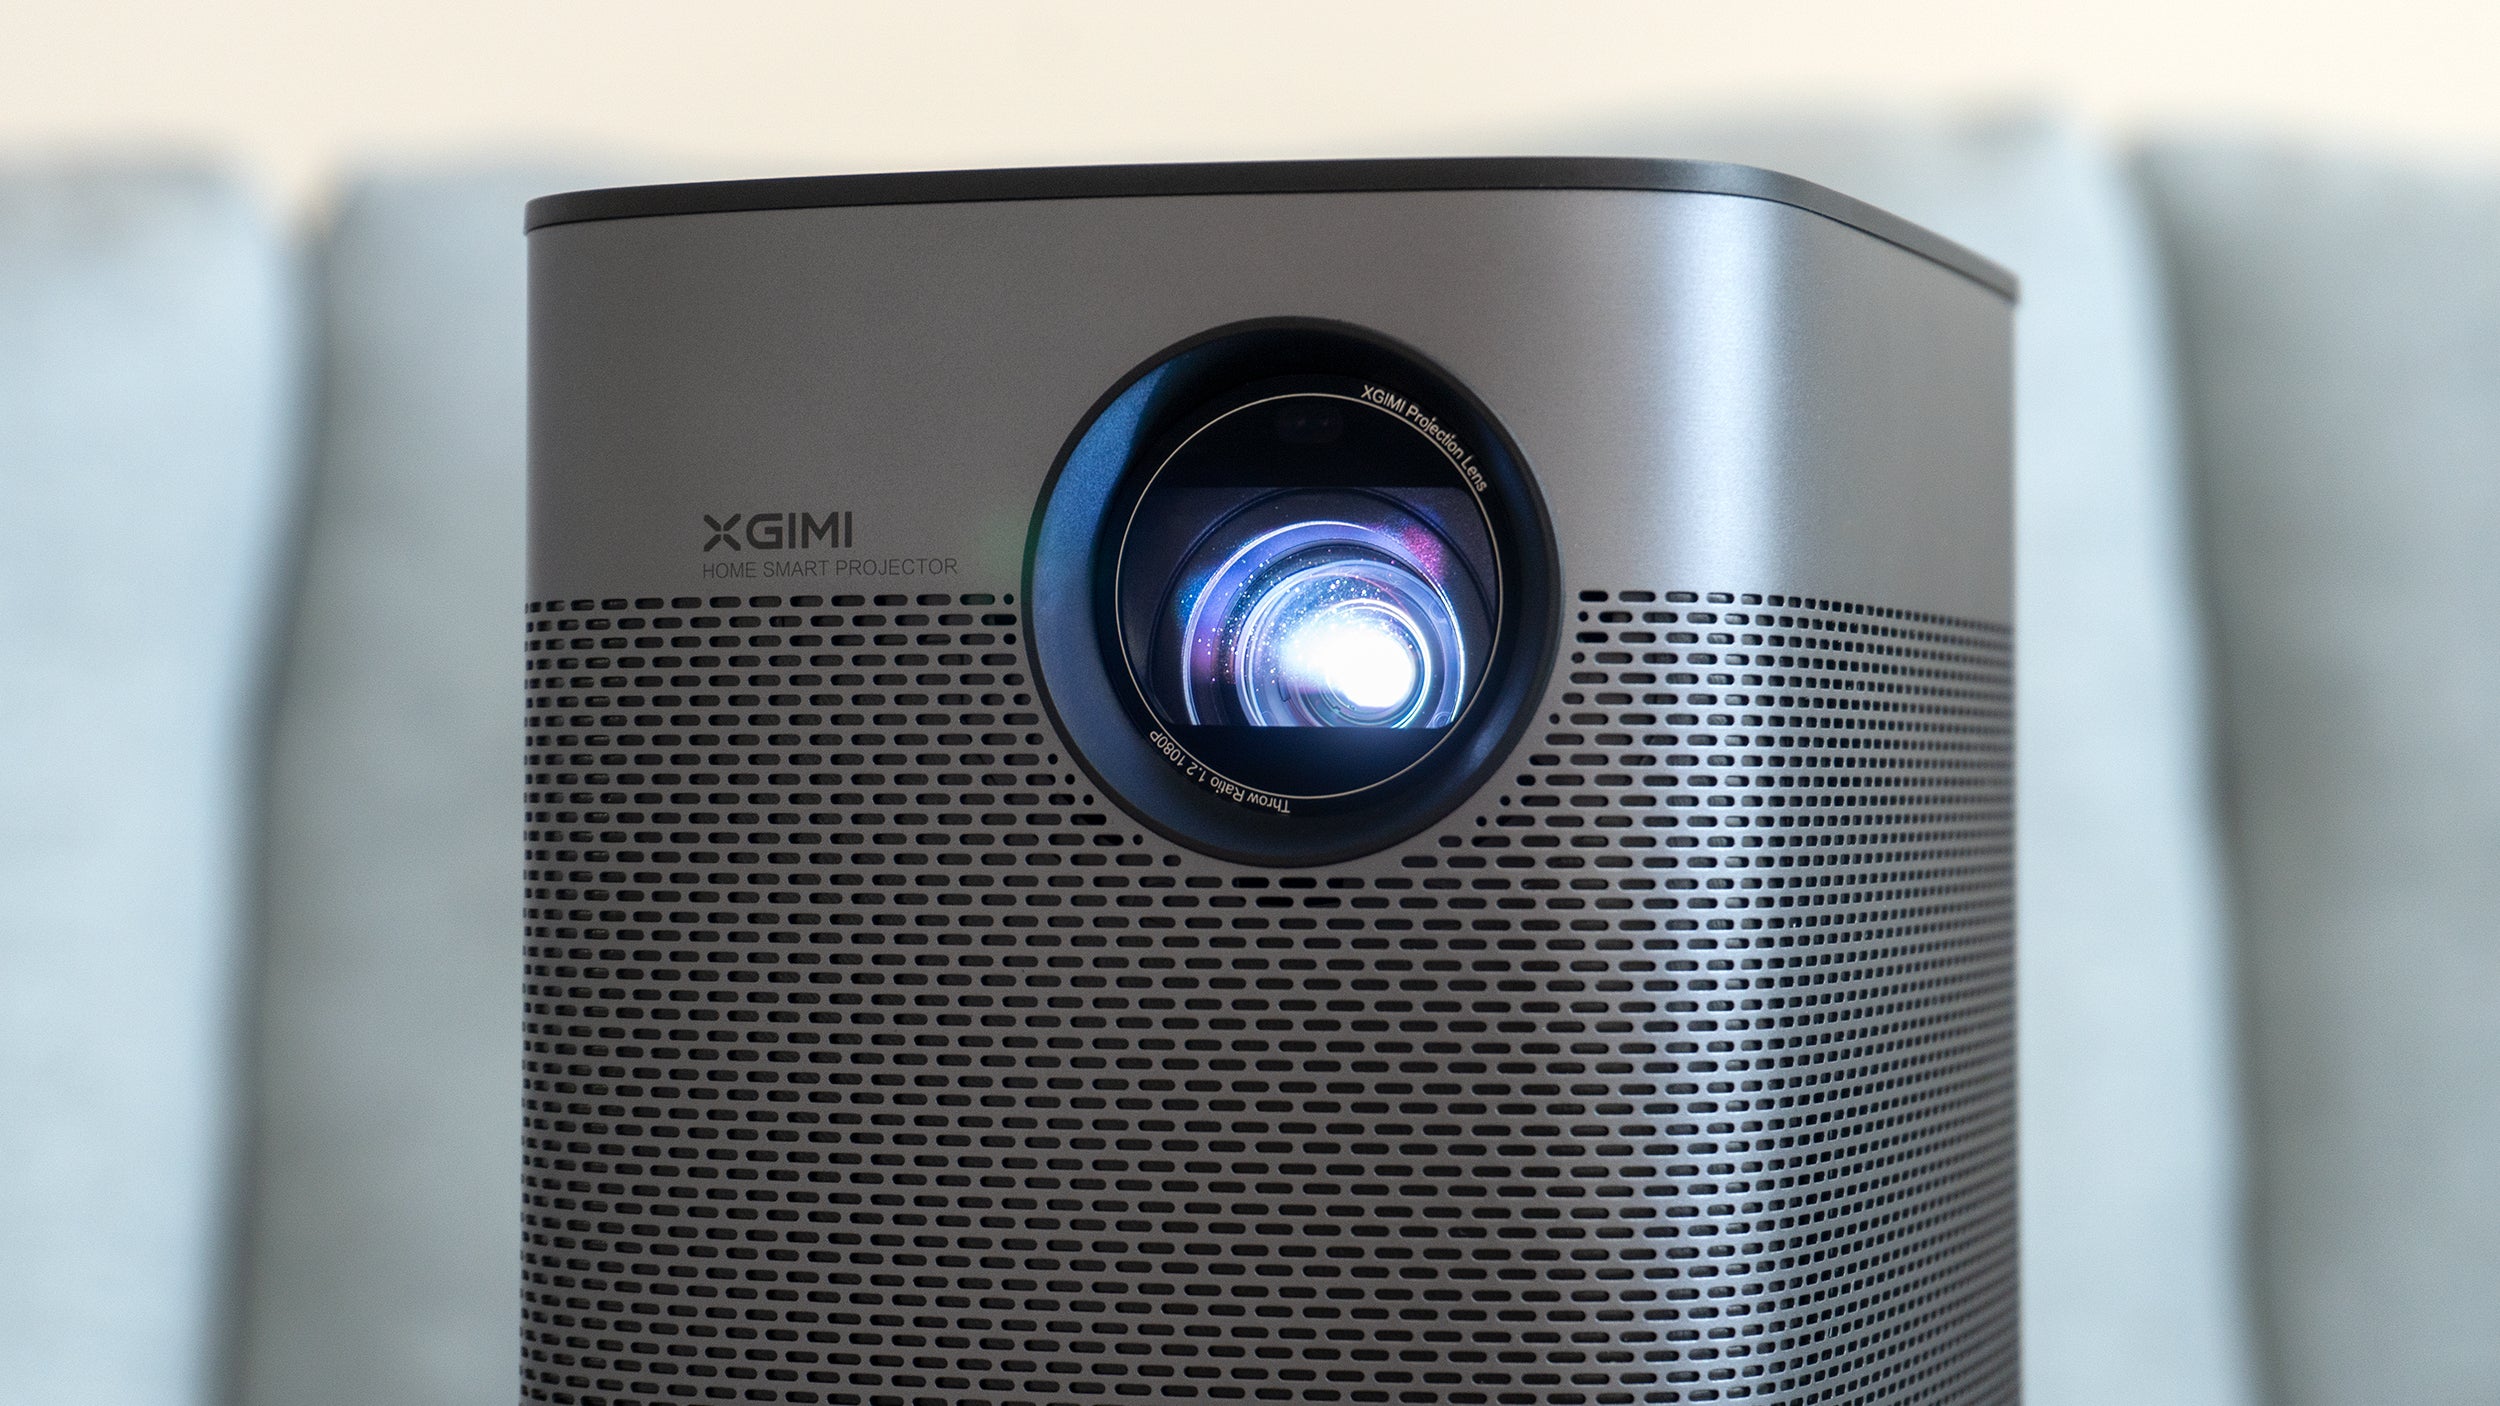 The XGIMI Halo+ boasts 900 lumens of brightness which is solid for a device this size, but limits where you can use it. (Photo: Andrew Liszewski | Gizmodo)